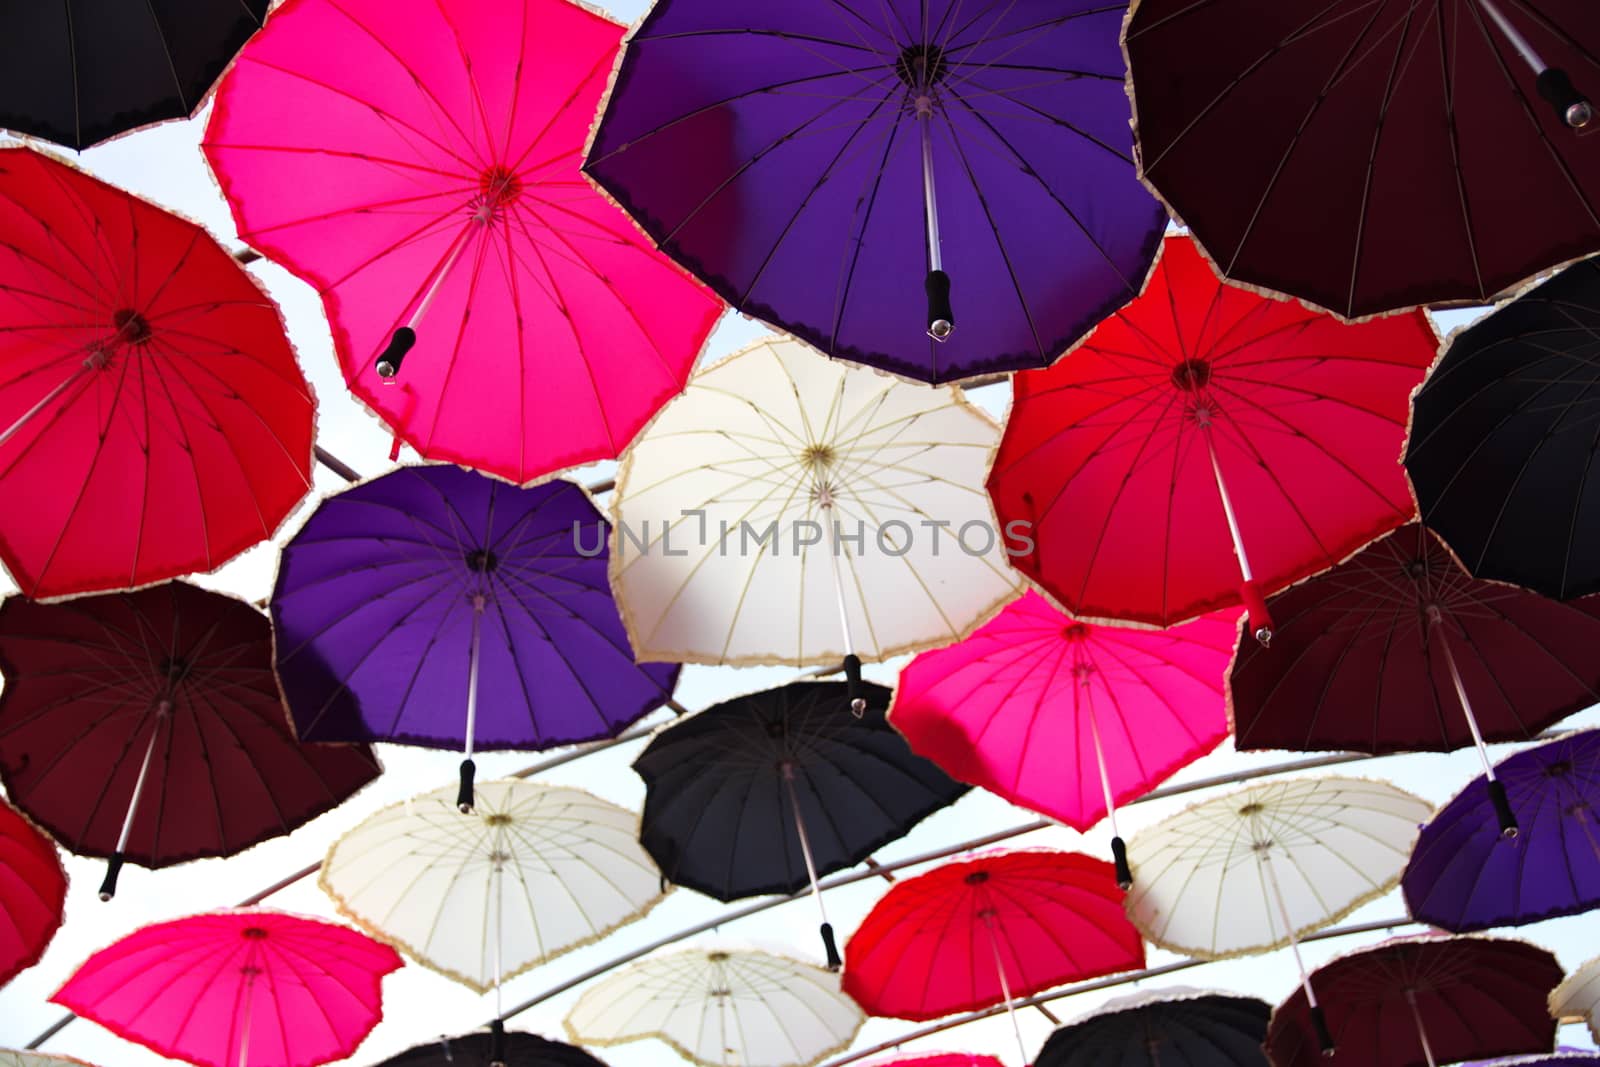 ceiling with colorful umbrellas.ceiling with colorful umbrellas